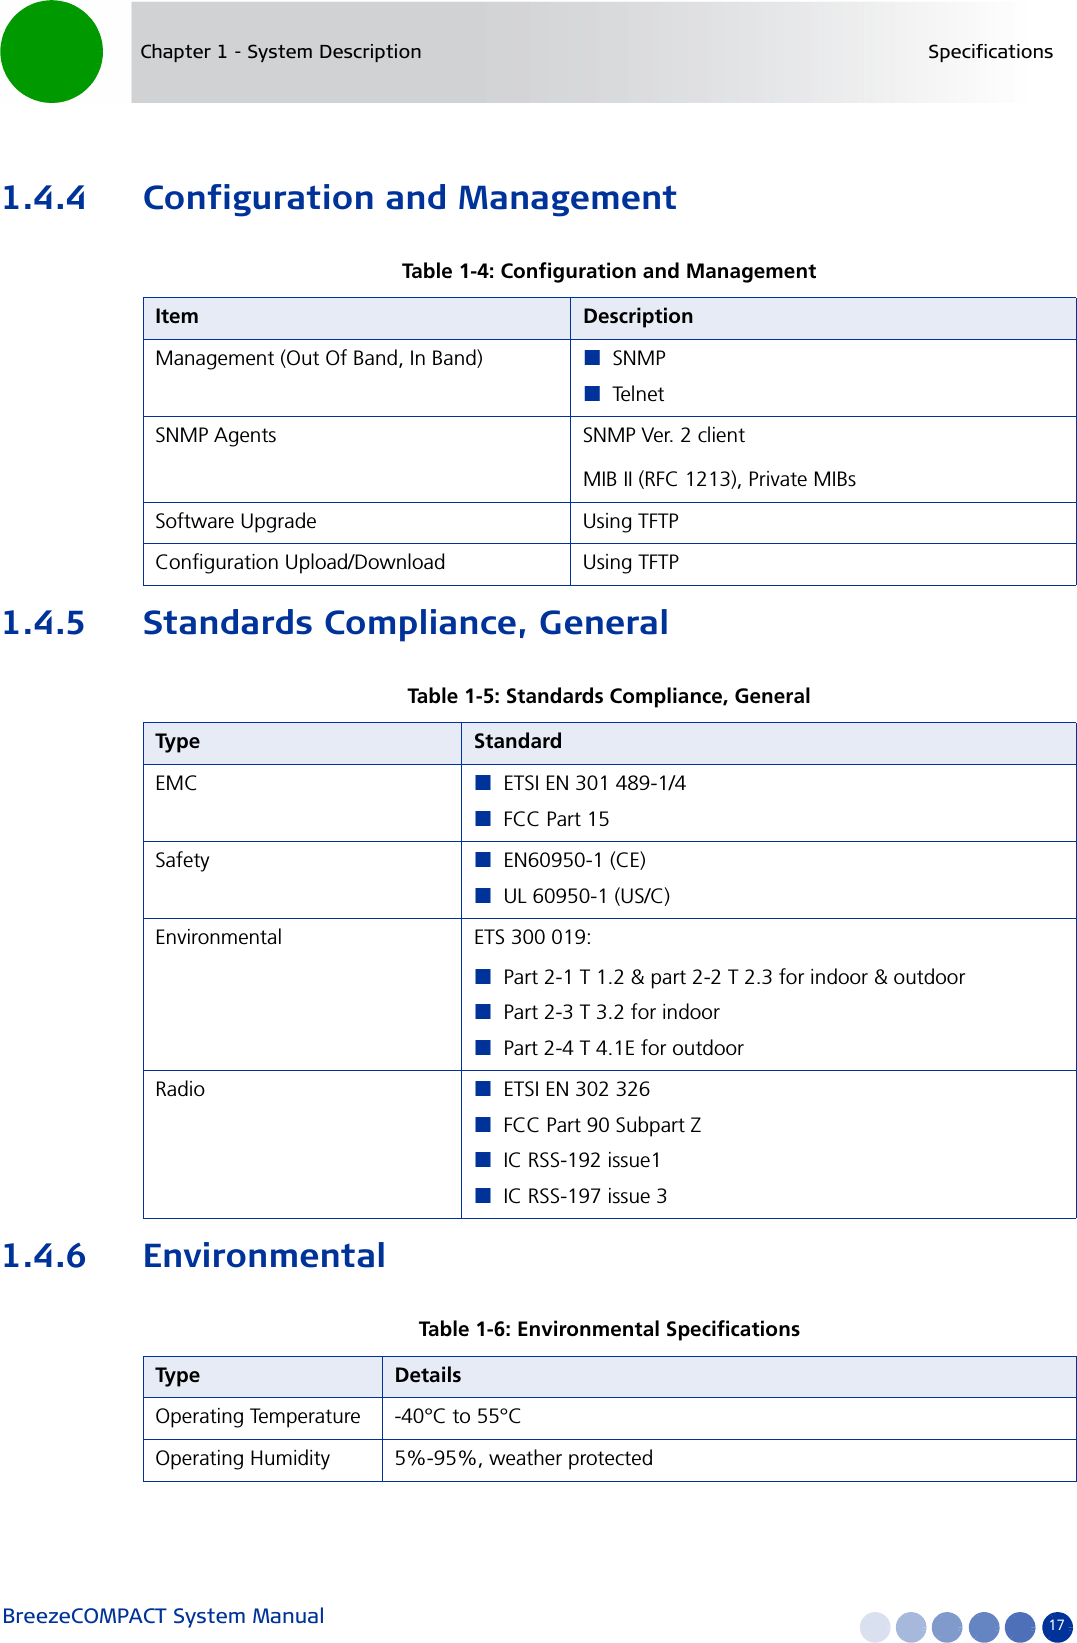 BreezeCOMPACT System Manual 17Chapter 1 - System Description Specifications1.4.4 Configuration and Management1.4.5 Standards Compliance, General1.4.6 EnvironmentalTable 1-4: Configuration and ManagementItem DescriptionManagement (Out Of Band, In Band) SNMPTelnetSNMP Agents SNMP Ver. 2 clientMIB II (RFC 1213), Private MIBsSoftware Upgrade Using TFTP Configuration Upload/Download Using TFTP Table 1-5: Standards Compliance, GeneralTyp e StandardEMC ETSI EN 301 489-1/4FCC Part 15Safety  EN60950-1 (CE)UL 60950-1 (US/C)Environmental  ETS 300 019:Part 2-1 T 1.2 &amp; part 2-2 T 2.3 for indoor &amp; outdoorPart 2-3 T 3.2 for indoorPart 2-4 T 4.1E for outdoorRadio  ETSI EN 302 326FCC Part 90 Subpart ZIC RSS-192 issue1IC RSS-197 issue 3Table 1-6: Environmental SpecificationsTyp e DetailsOperating Temperature -40°C to 55°COperating Humidity 5%-95%, weather protected